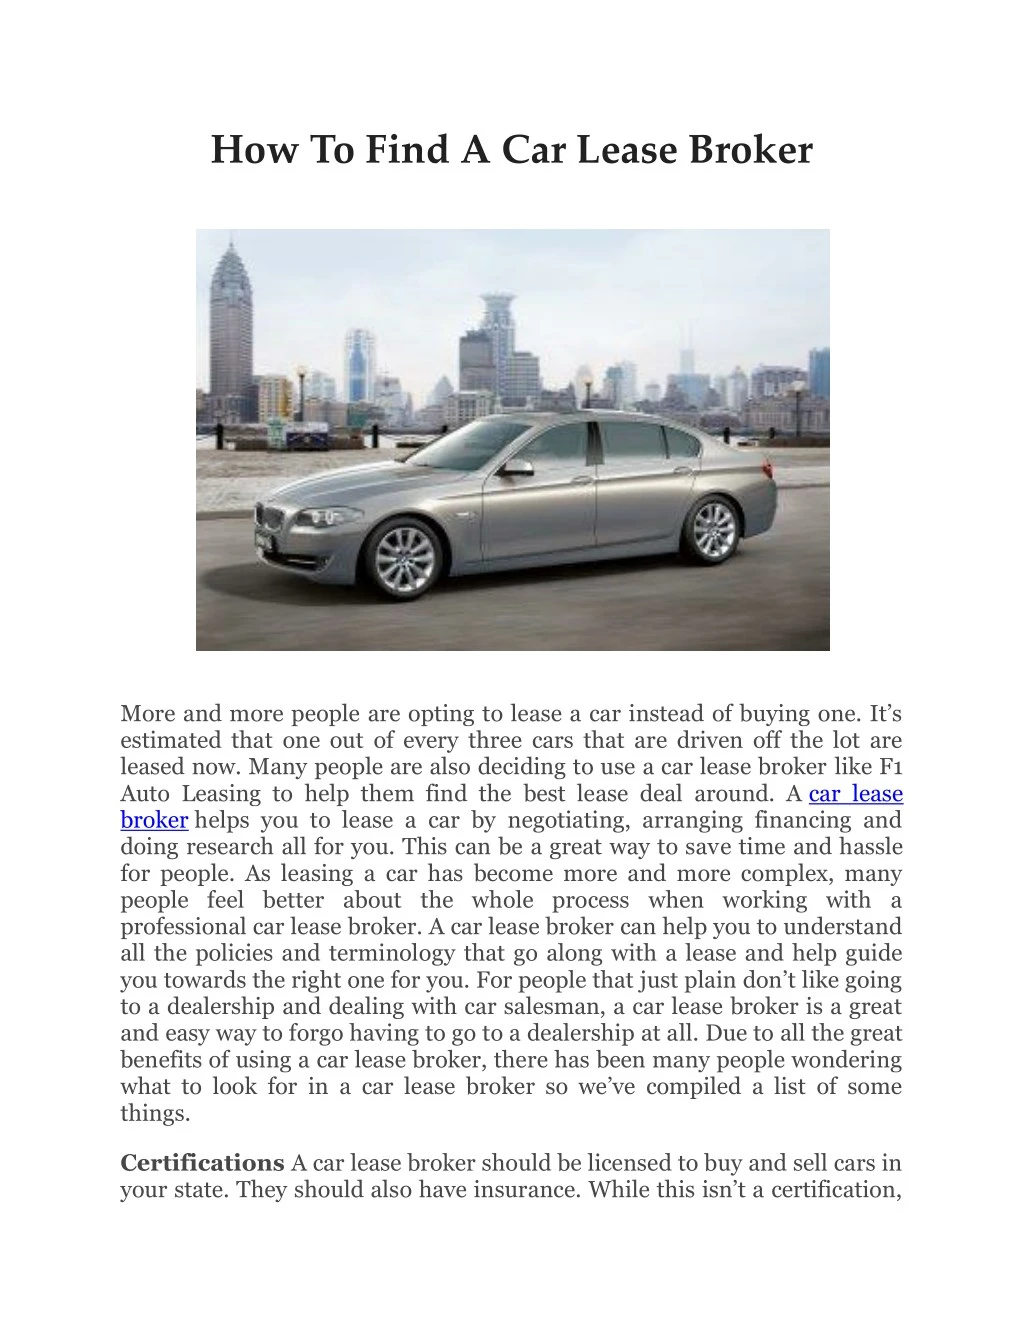 how to find a car lease broker